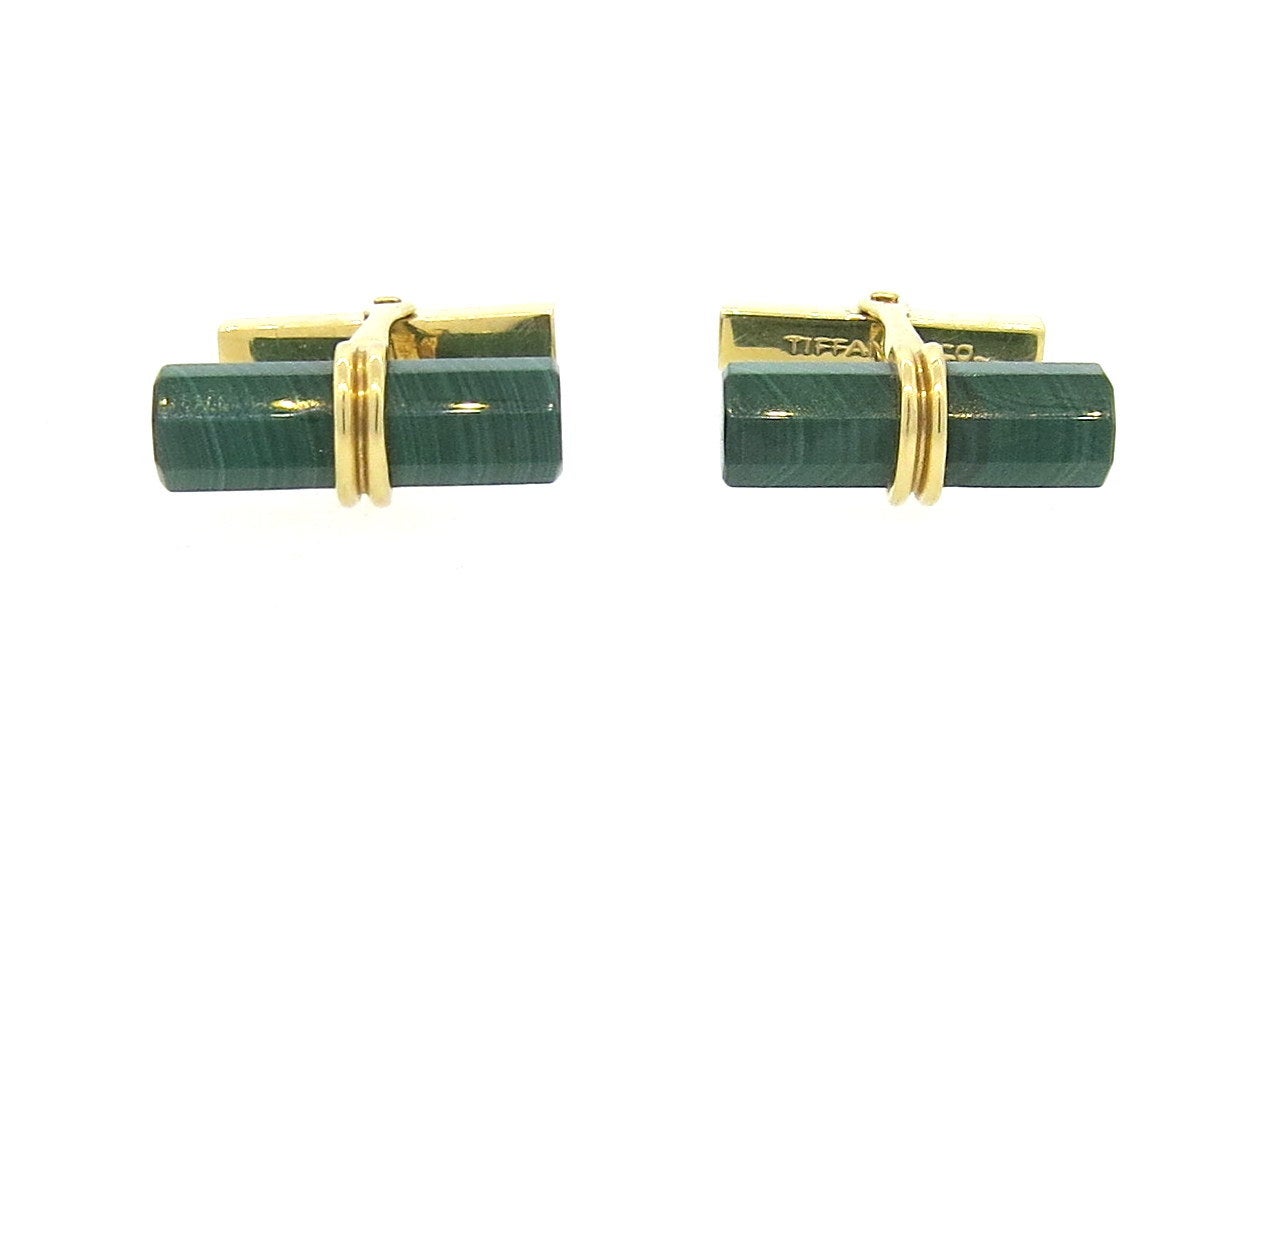 Vintage 14k gold cufflinks, crafted by Tiffany & Co, set with malachite stones. Cufflink top measures 20mm x 8mm. Marked 585 and Tiffany & Co. Weight - 11.6 grams